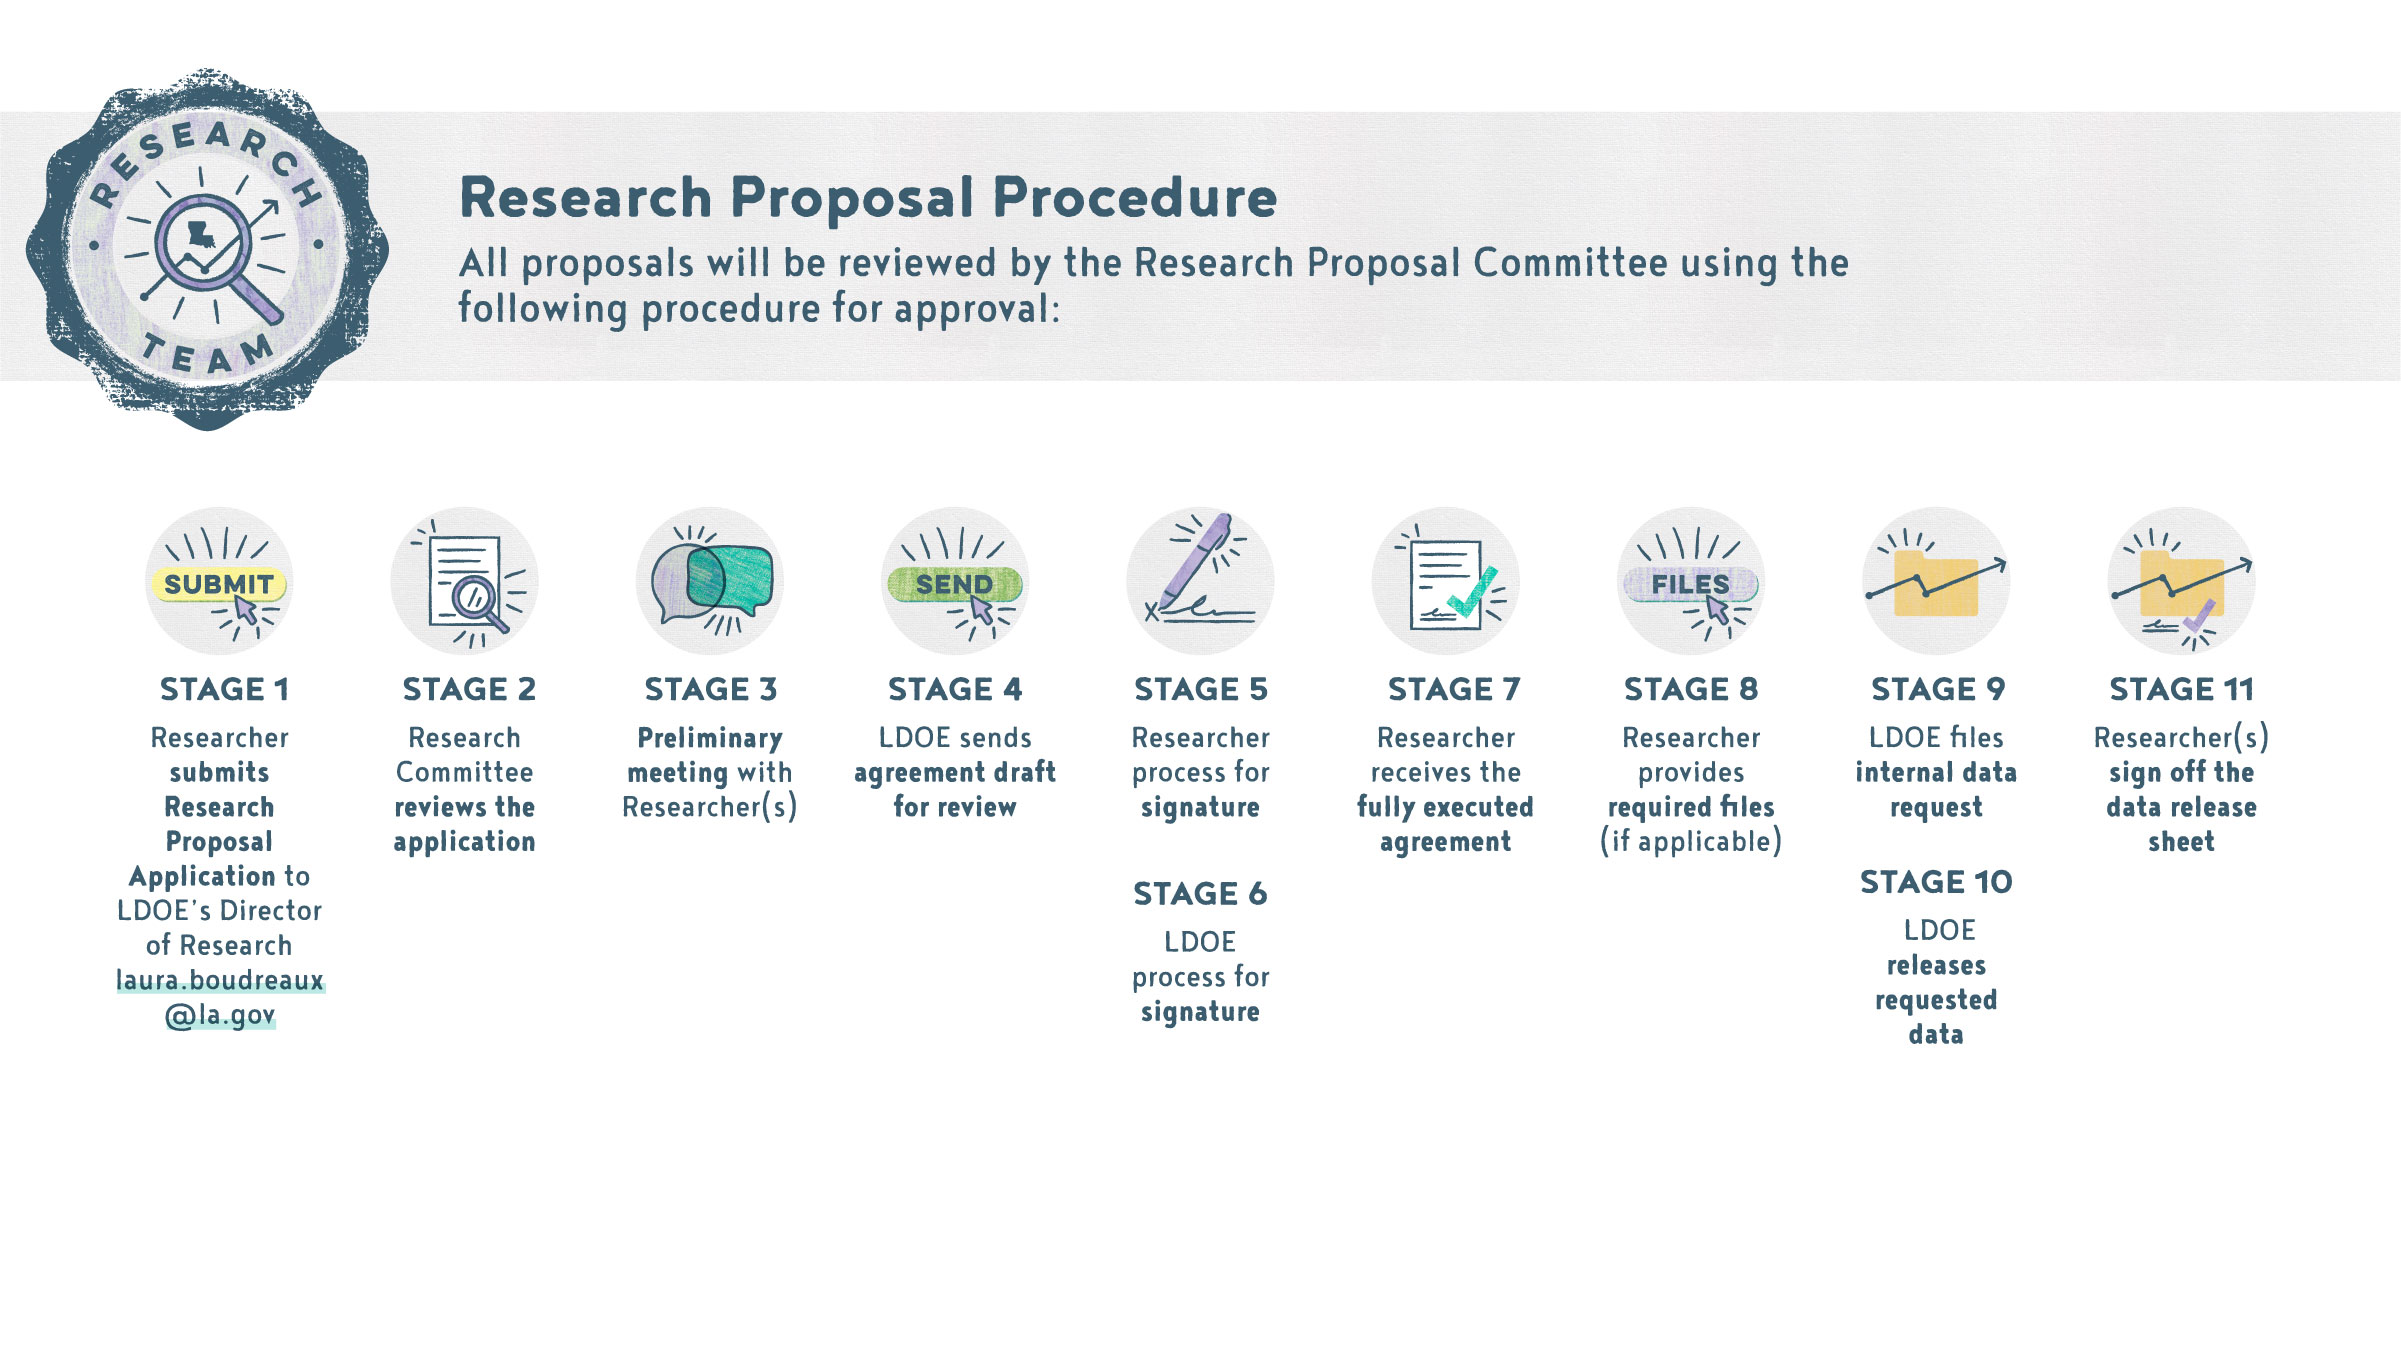 Research Proposal Procedure - Click Image for PDF